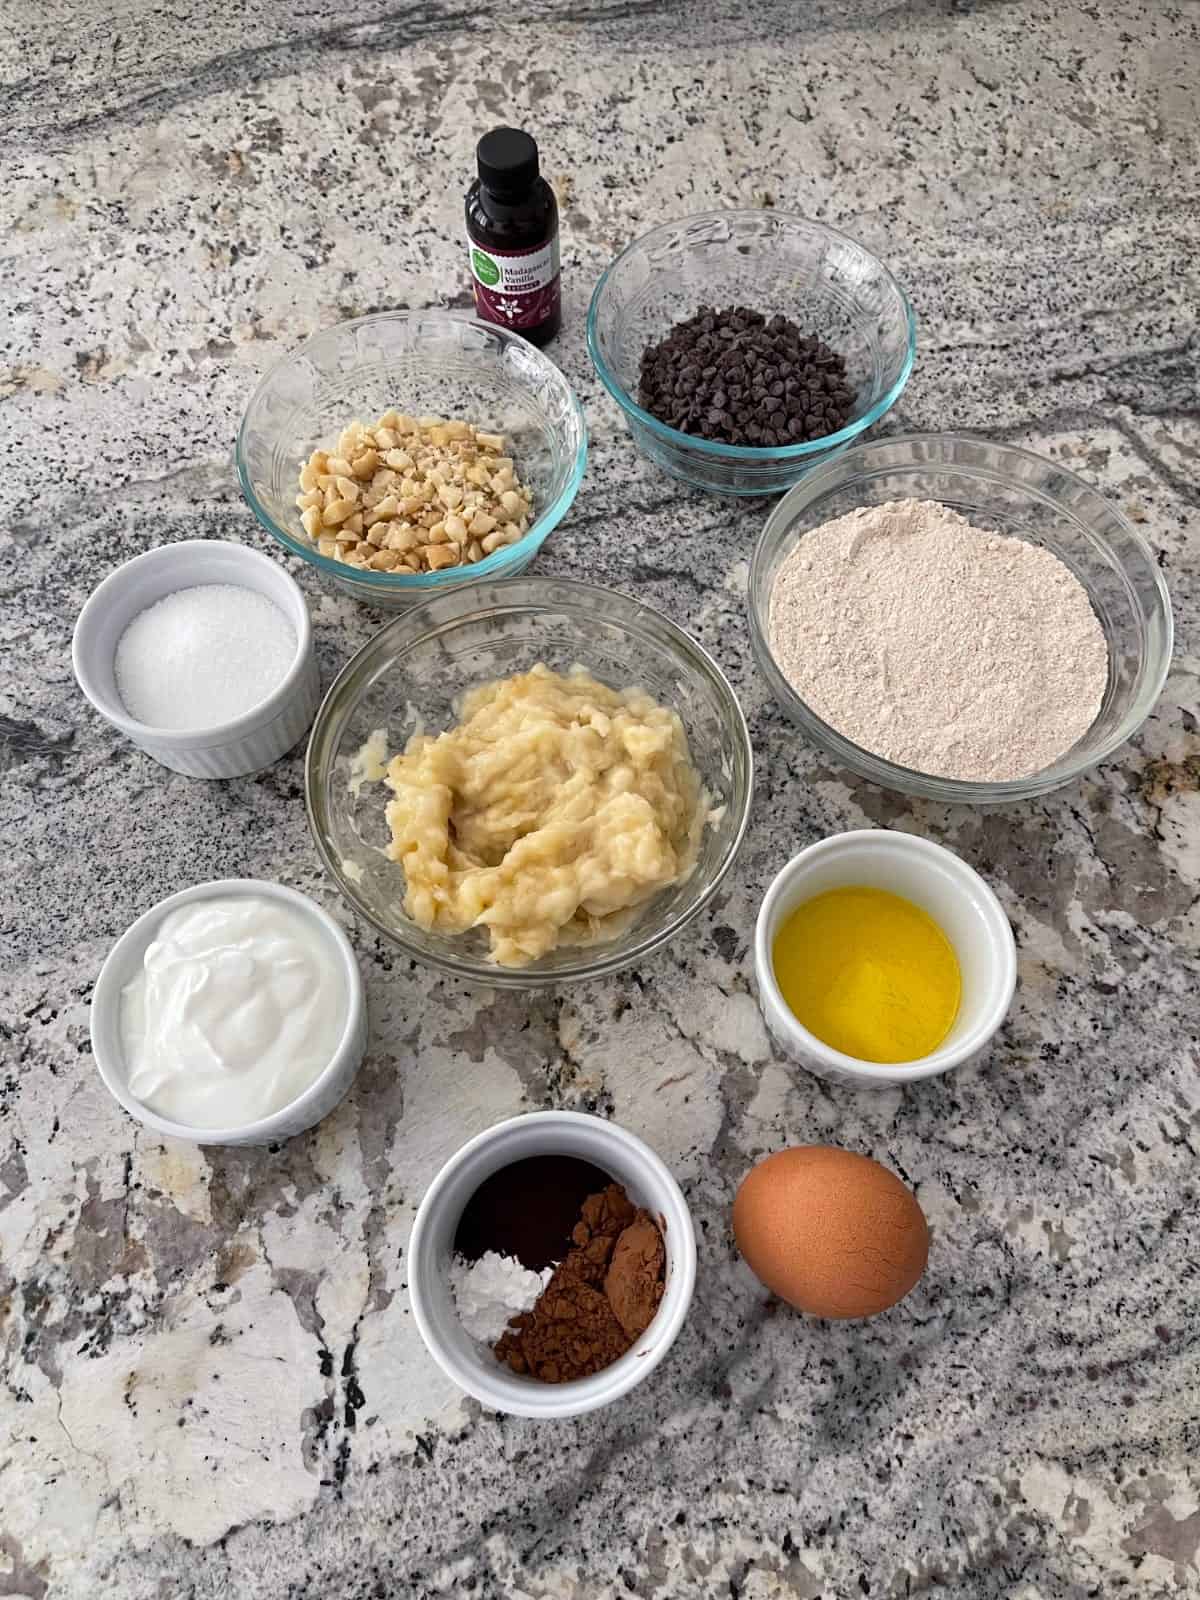 Ingredients including vanilla, macadamia nuts, mini chocolate chips, flour, mashed banana, Greek yogurt, sweetener, butter, egg and spices.